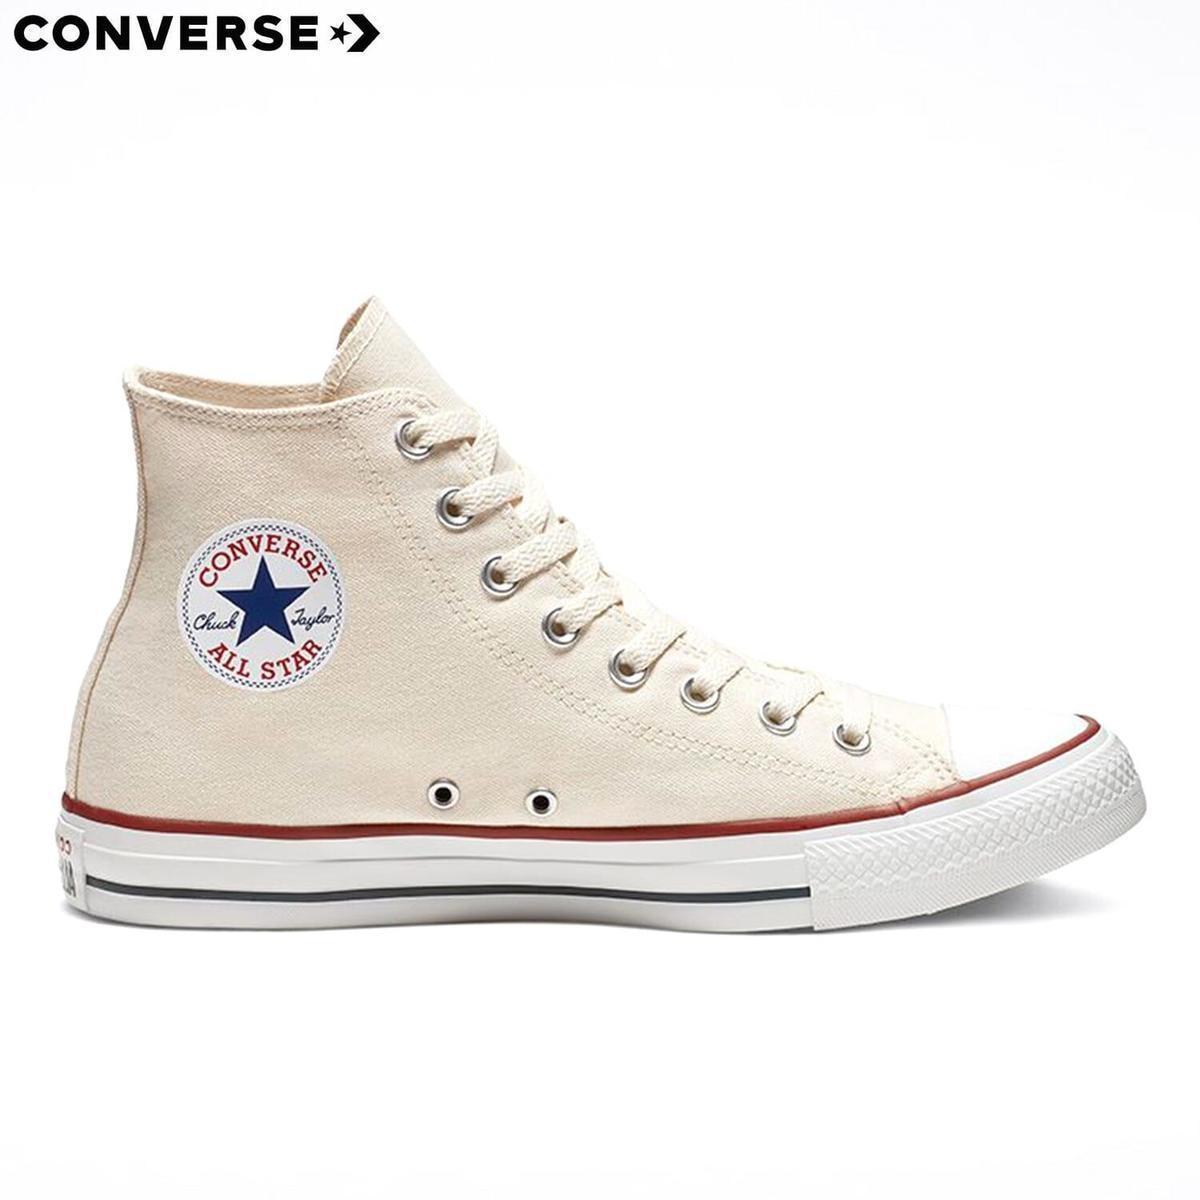 converse chuck taylor all star hi top natural ivory shoes for unisex 159484c